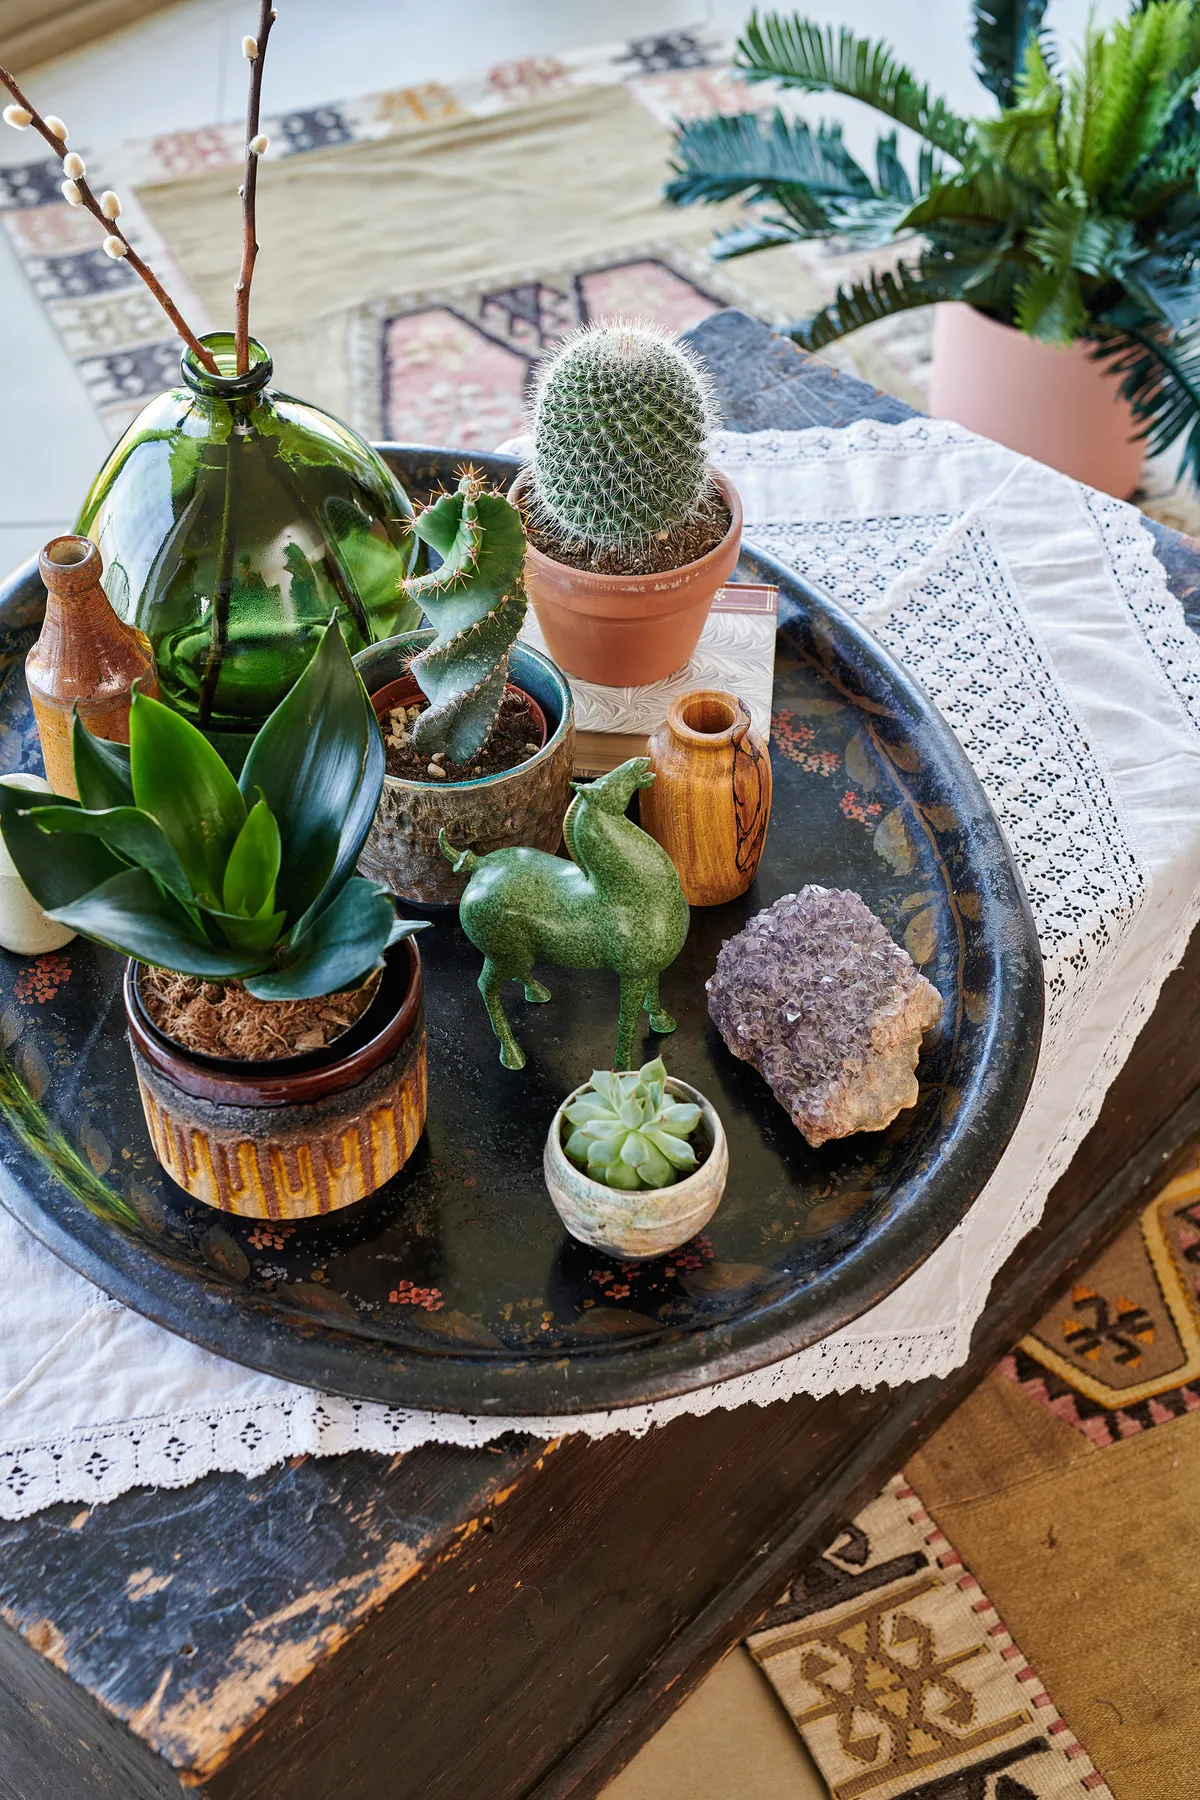 A selection of succulents, cacti, crystals and curios on an antique wood tray.